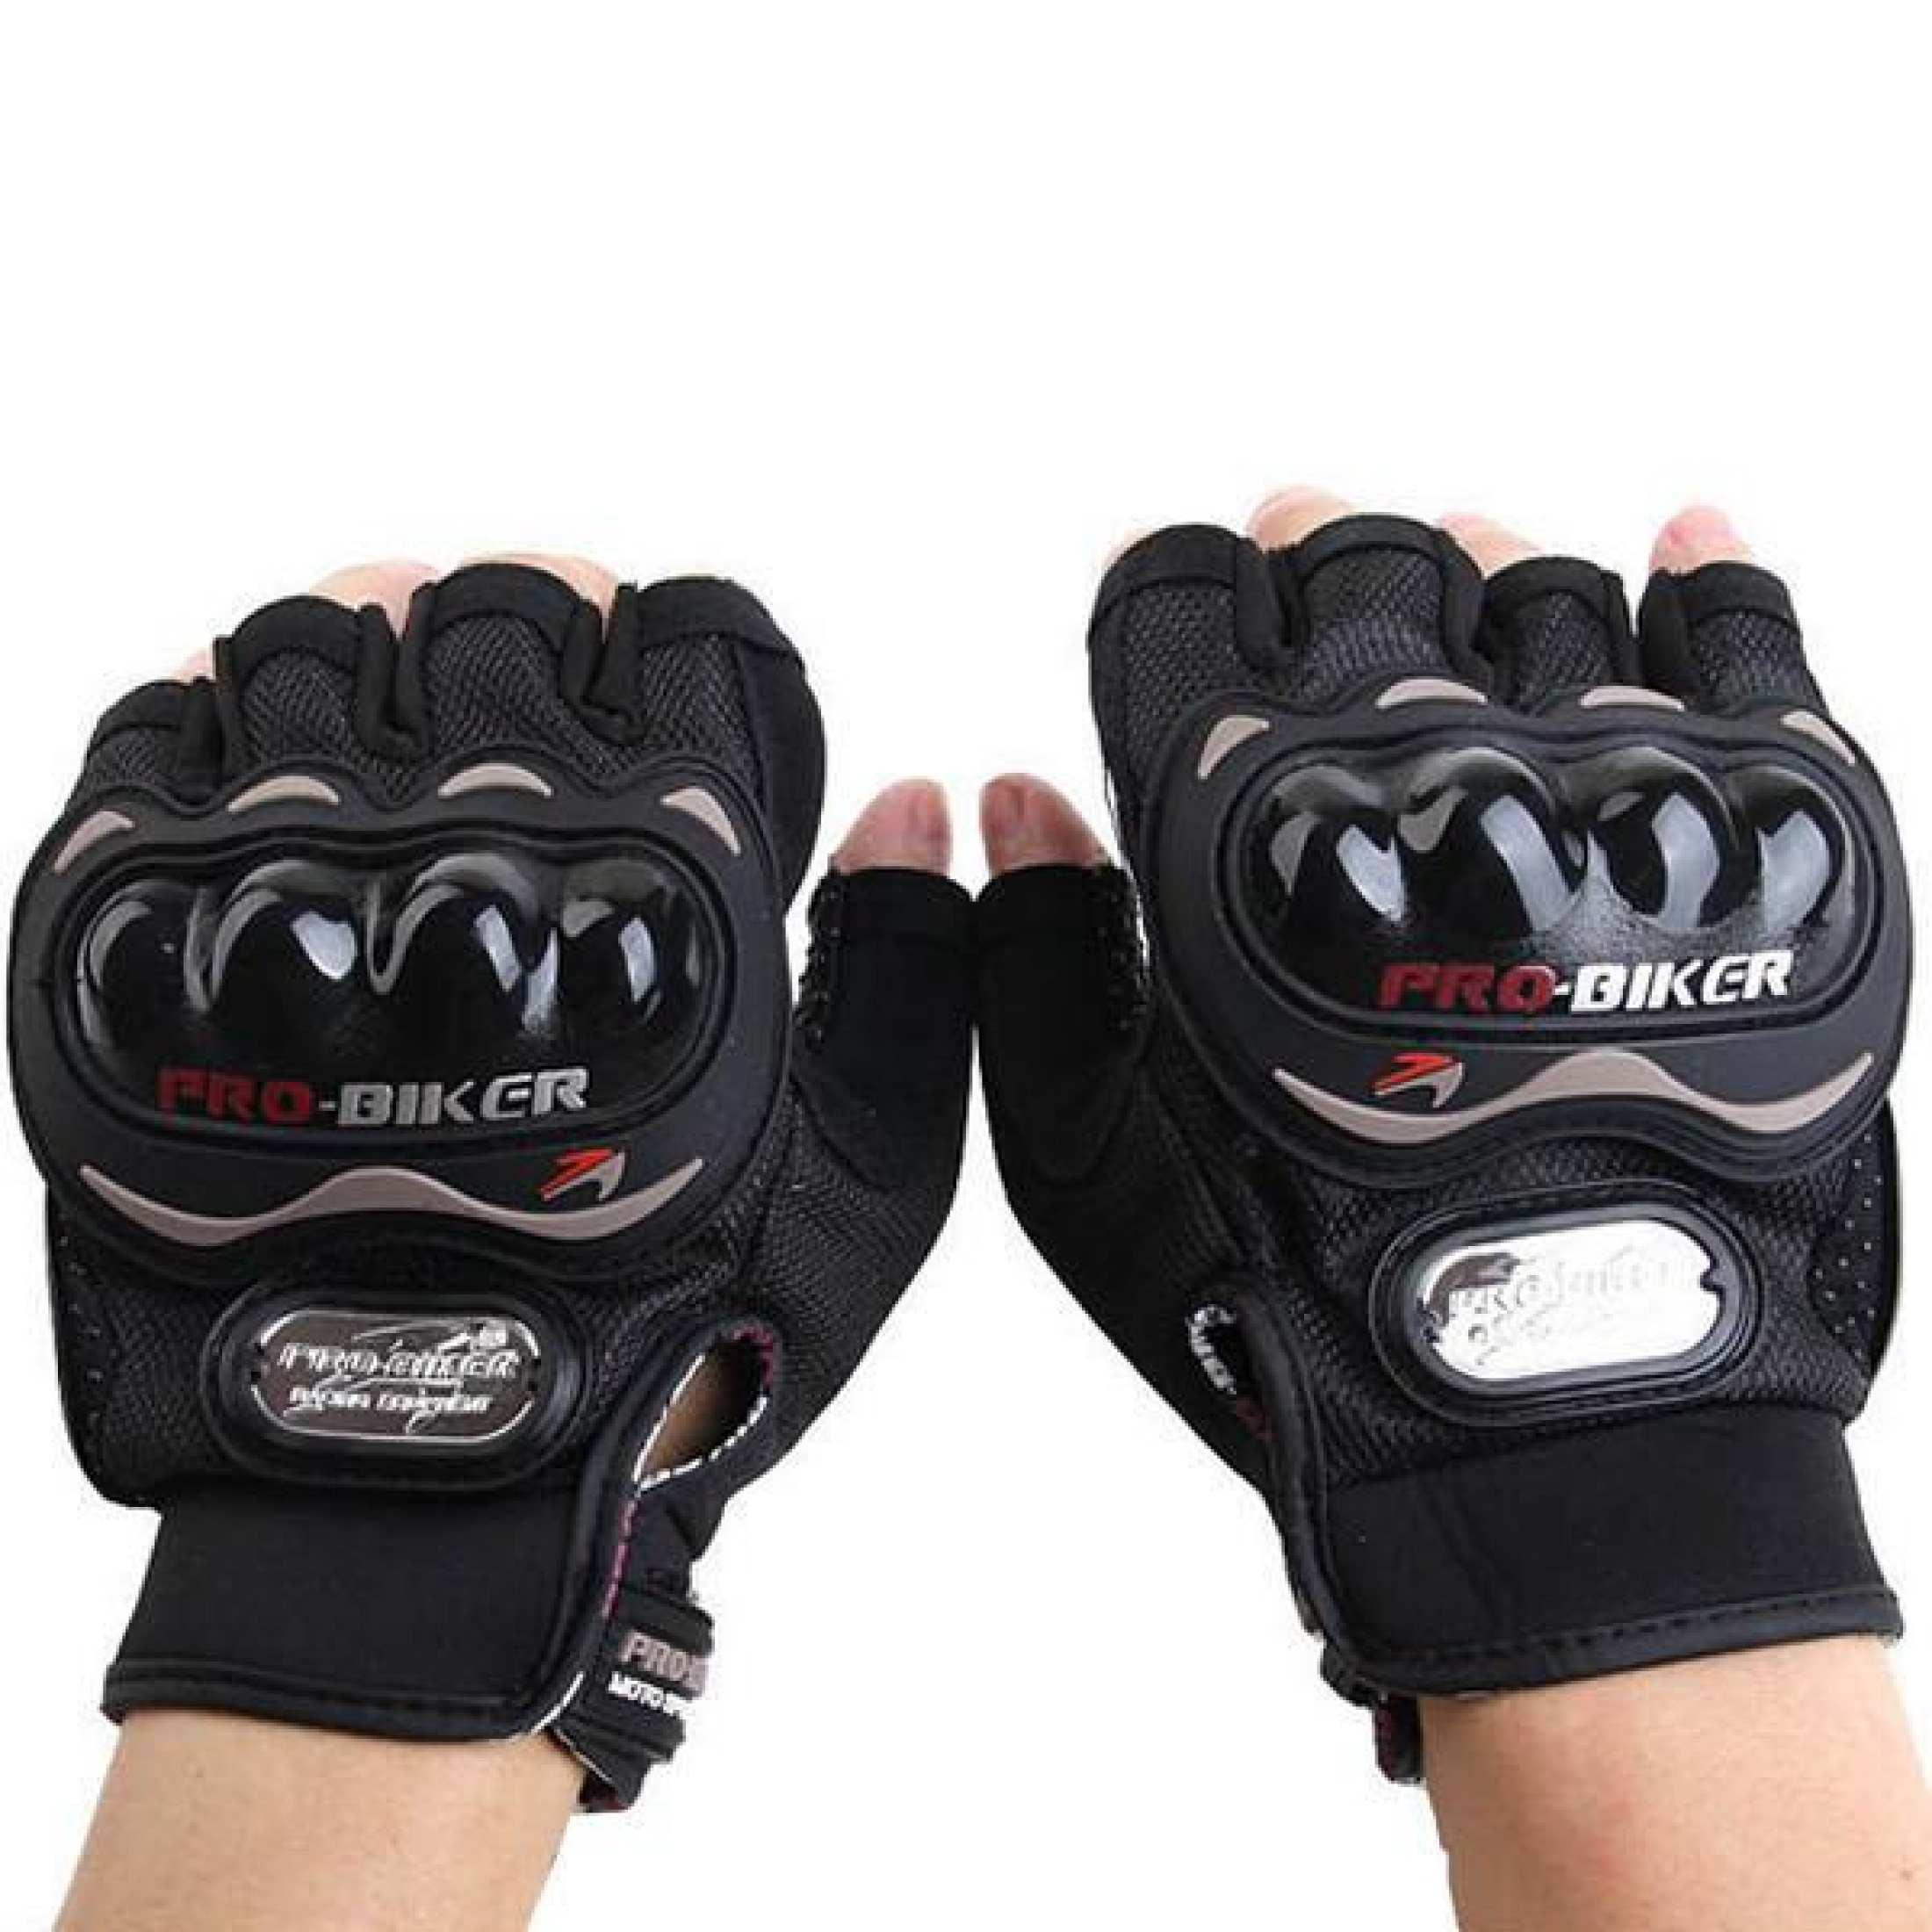 Biker Half Finger Motorcycle Gloves Riding Cycling Motorcycle Gloves Summer Protective